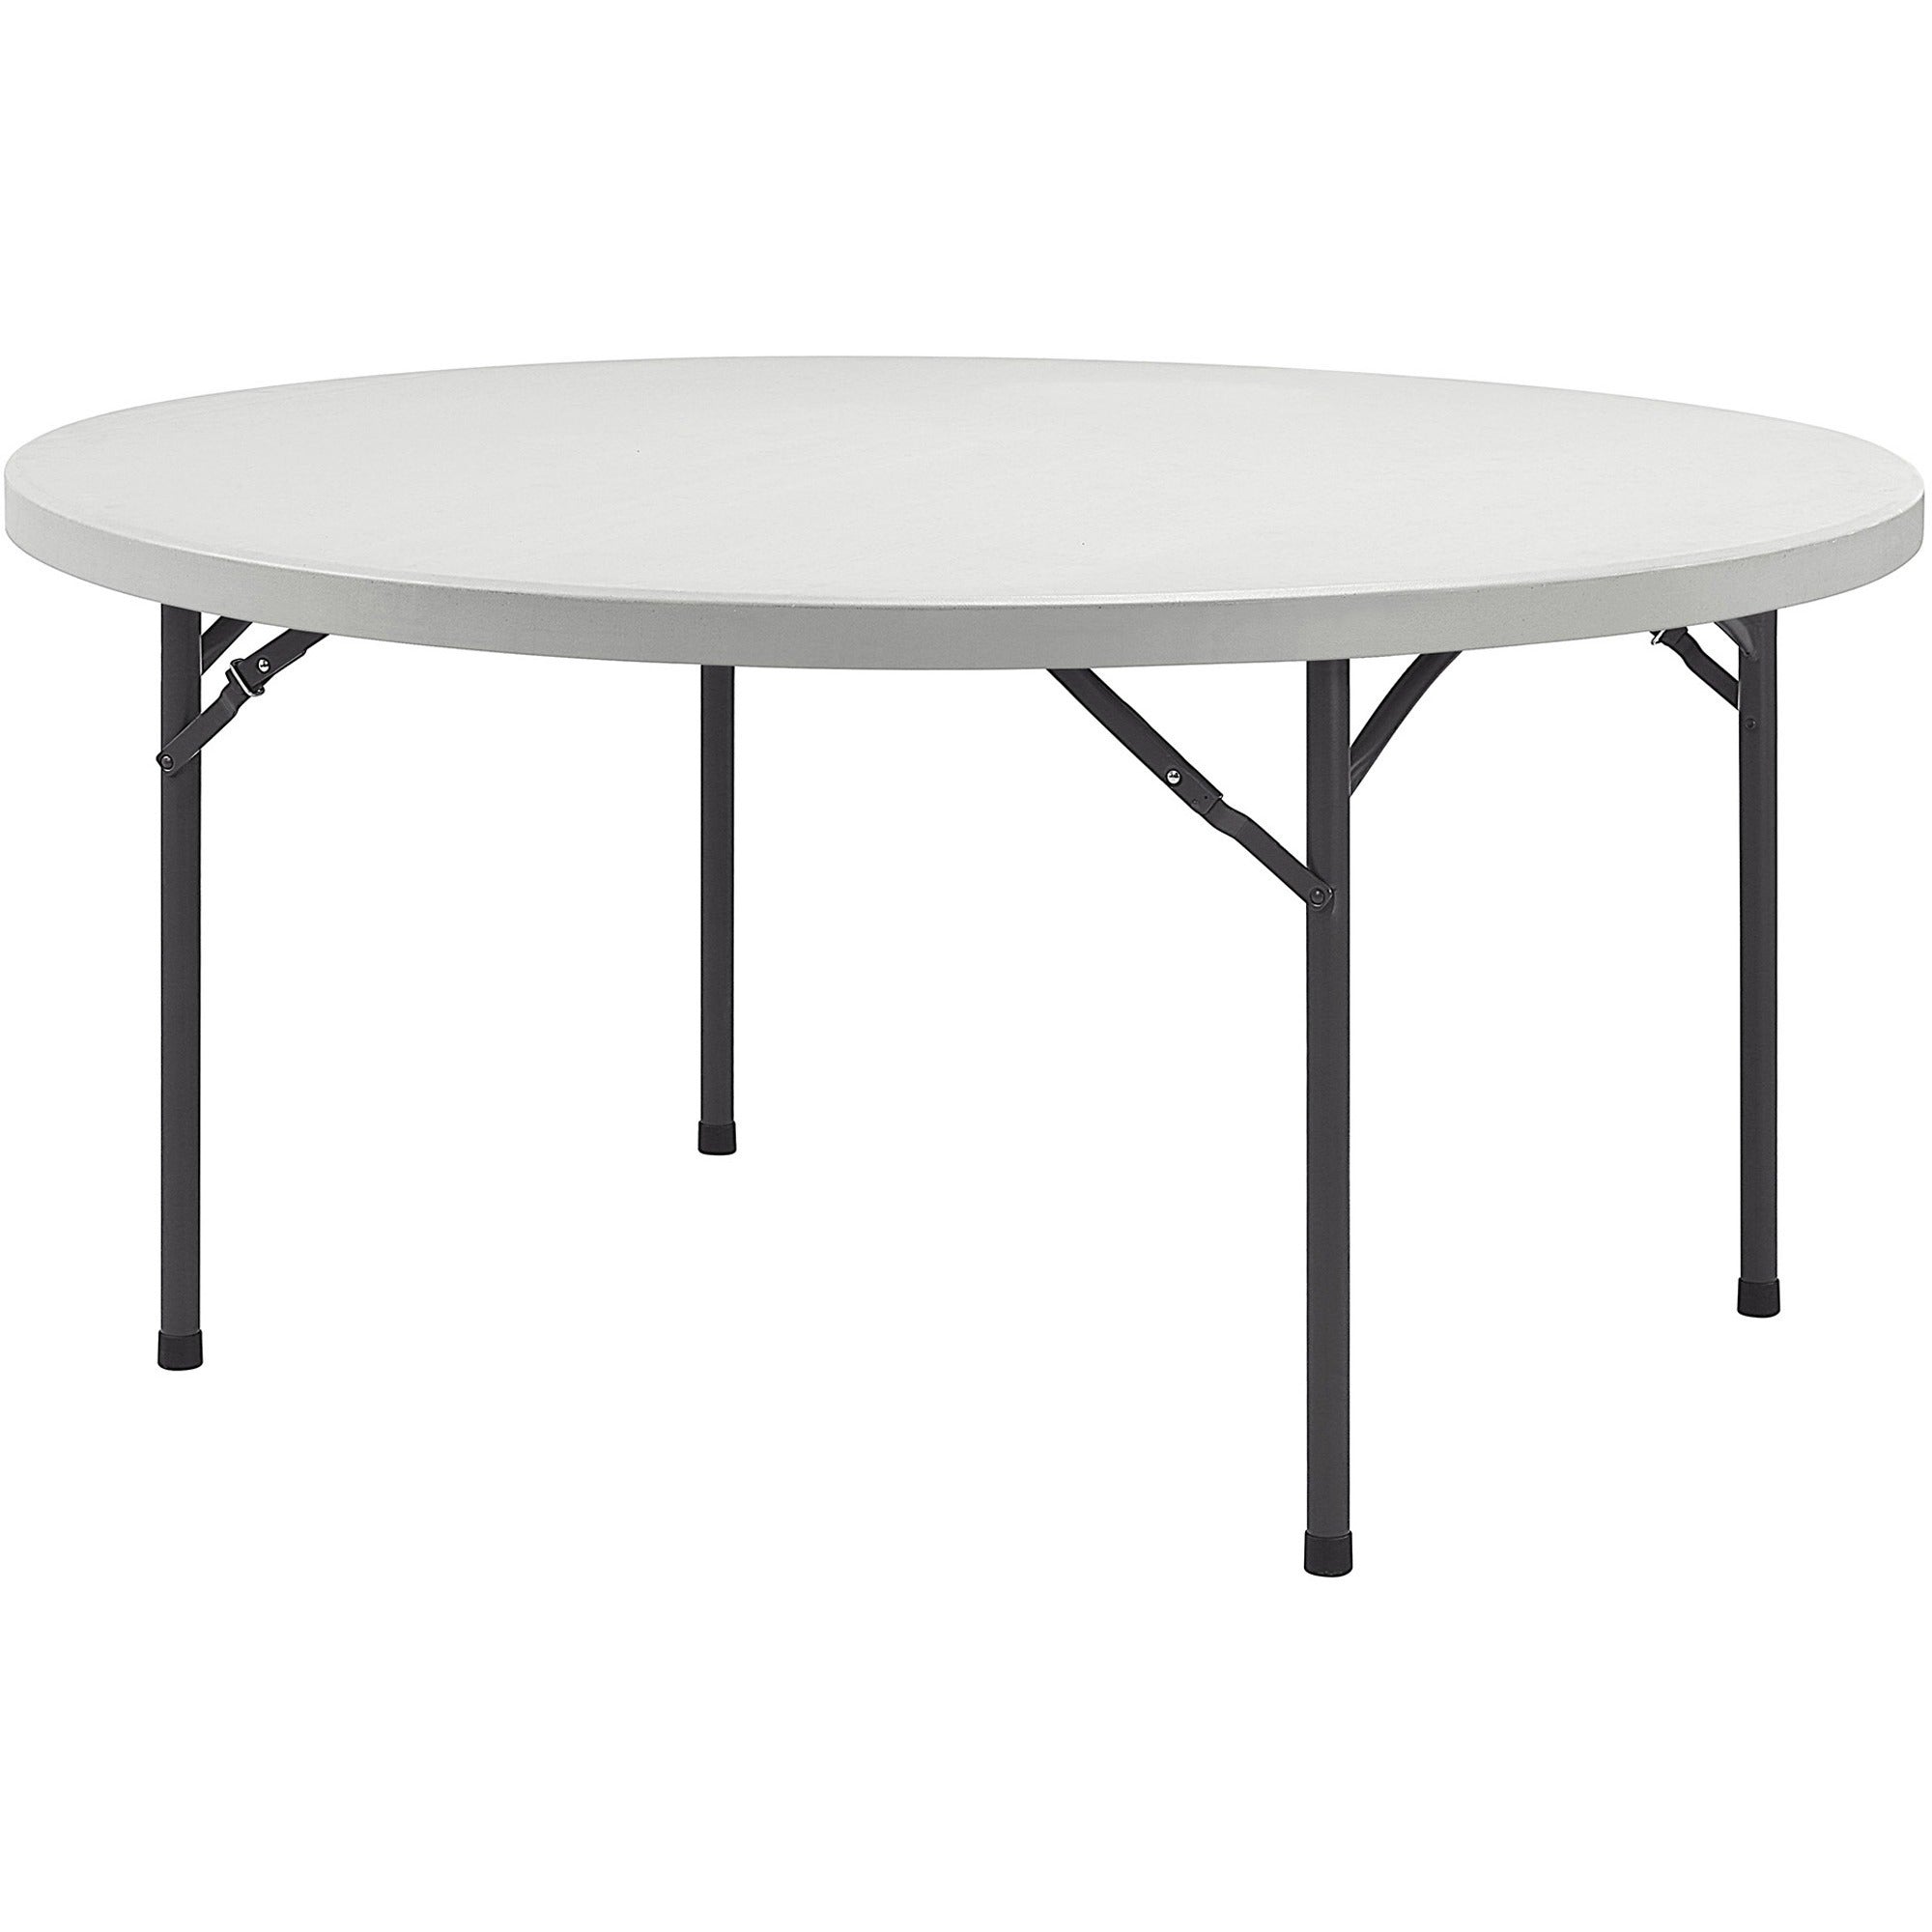 Lorell Ultra-Lite Banquet Folding Table - For - Table TopRound Top - 600 lb Capacity x 48" Table Top Diameter - 29.25" Height x 48" Width x 48" Depth - Gray, Powder Coated - 1 Each - 